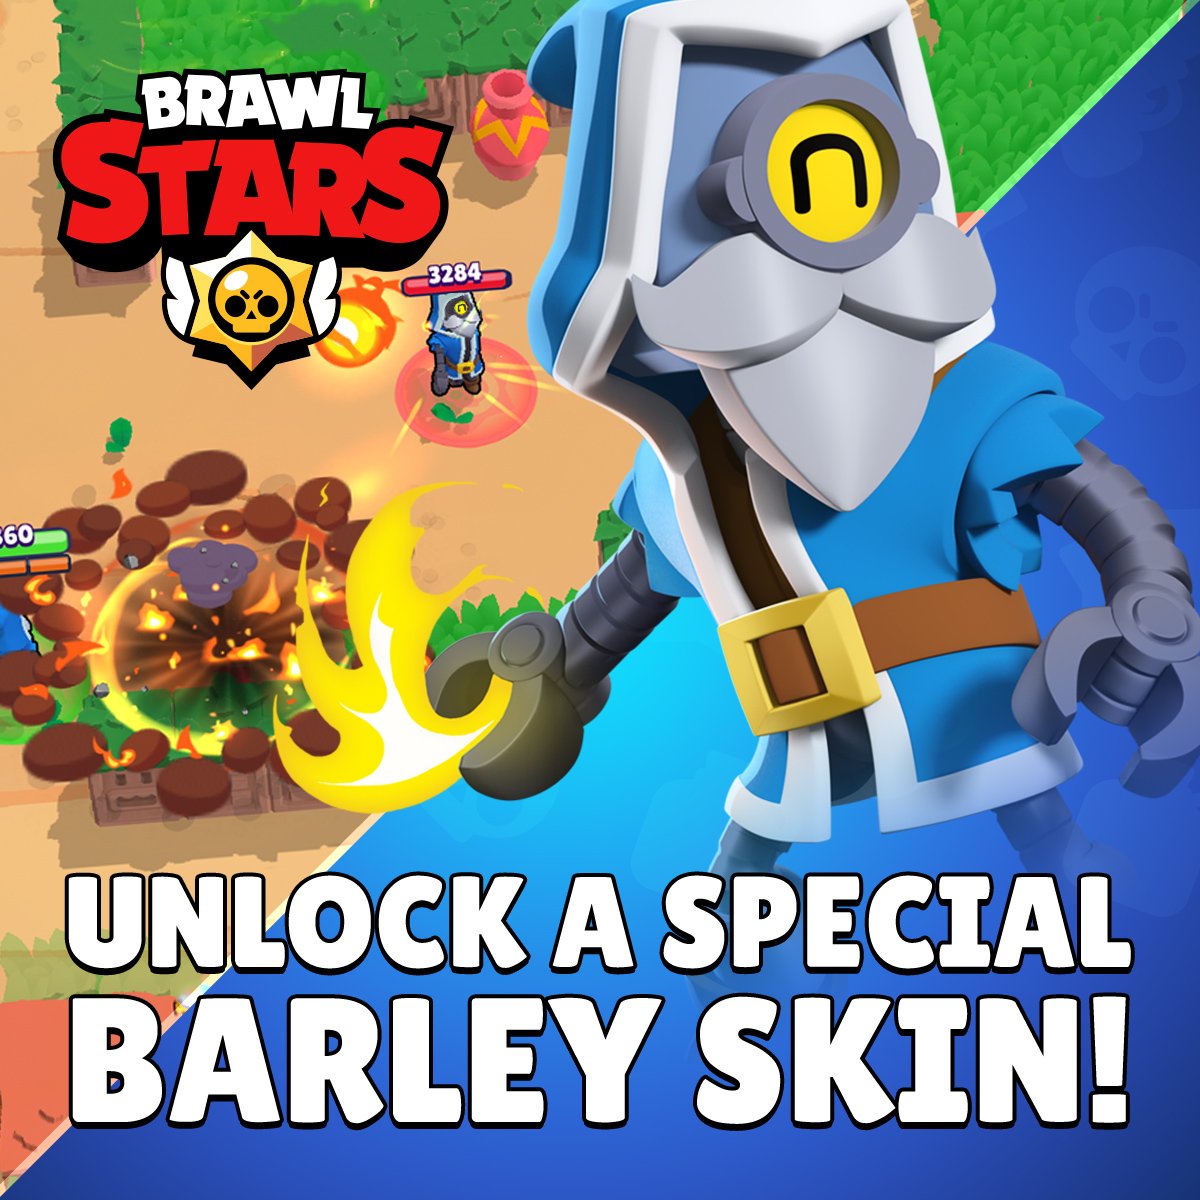 Brawl Stars On Twitter Connect Supercell Id In Brawl Stars To Unlock Barley And An Exclusive Wizard Skin Https T Co Zitr8yiqlm - brawl stars supercell release date